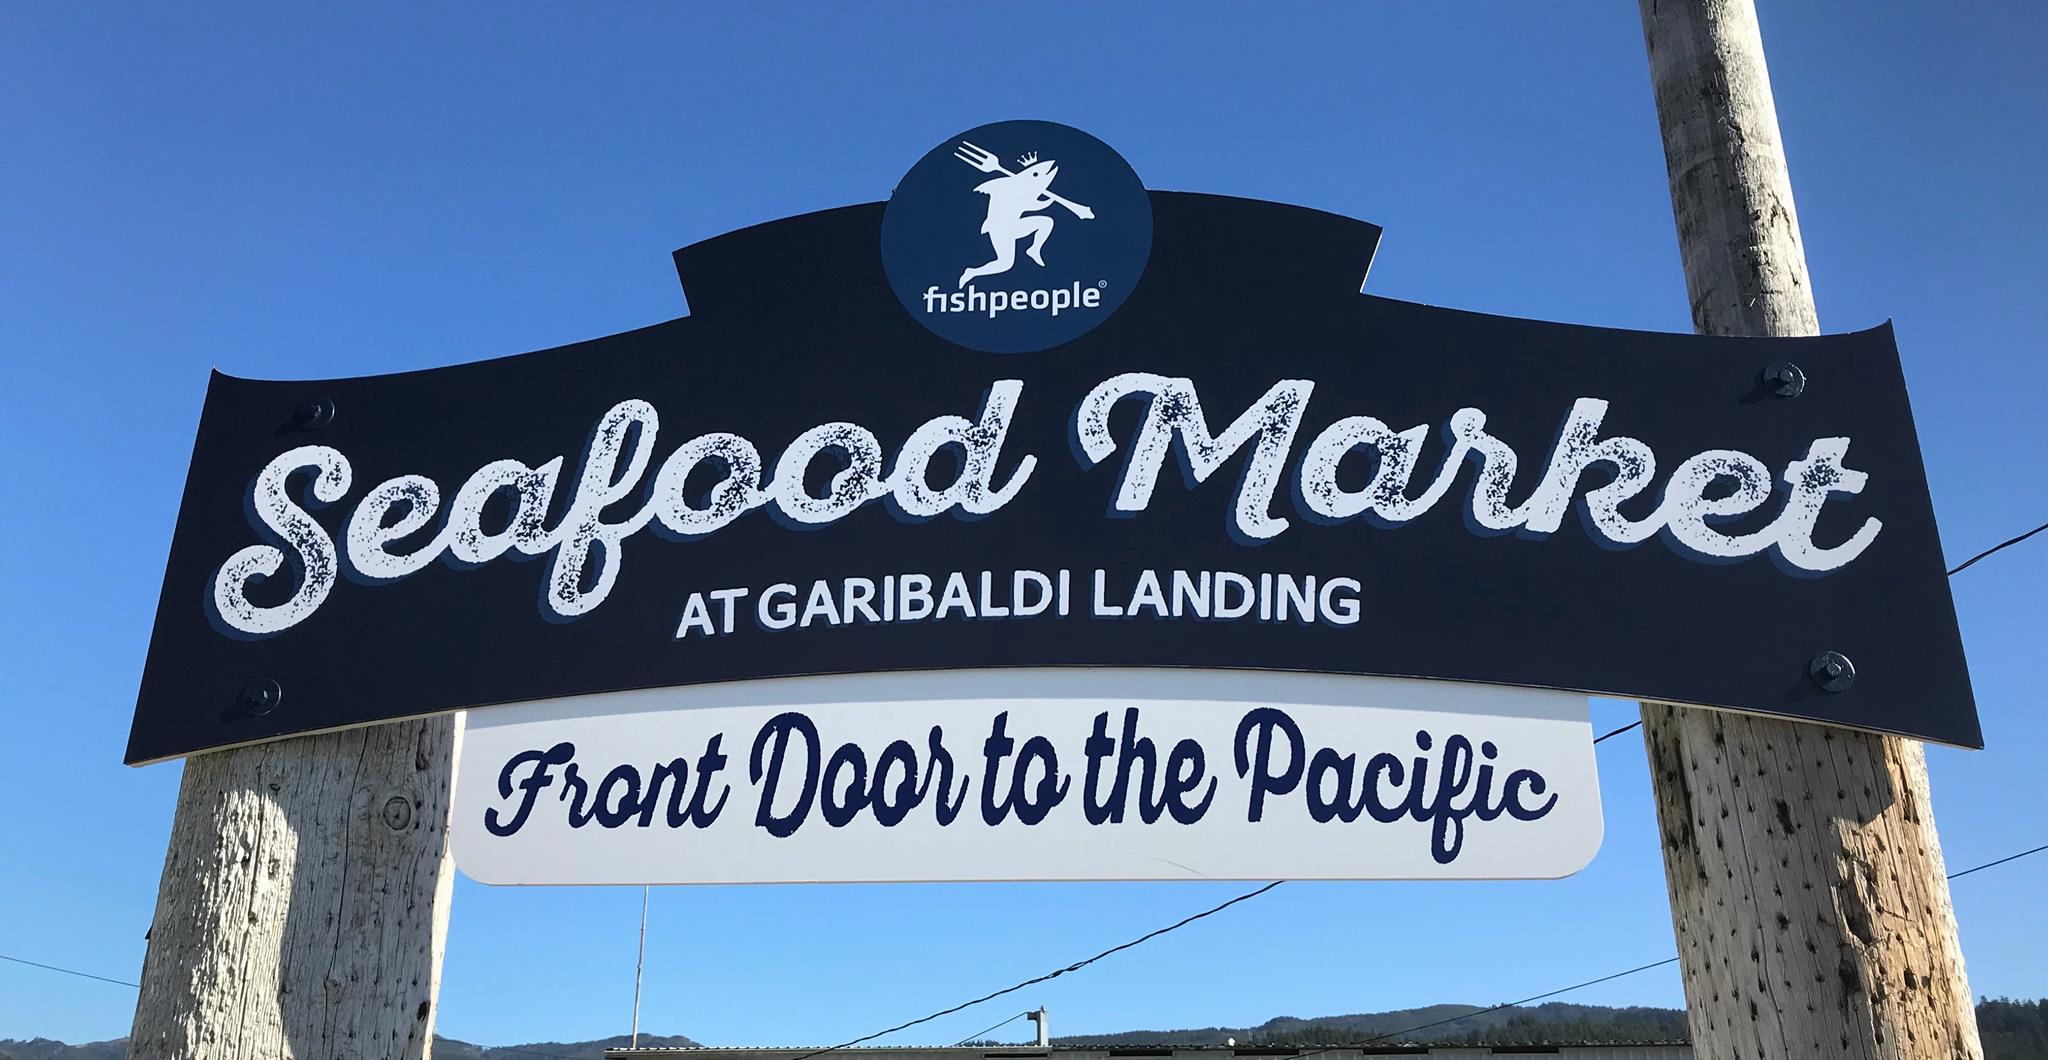 Blue sign that reads Fishpeople Seafood Market at Garibaldi Landing, Front Door to the Pacific